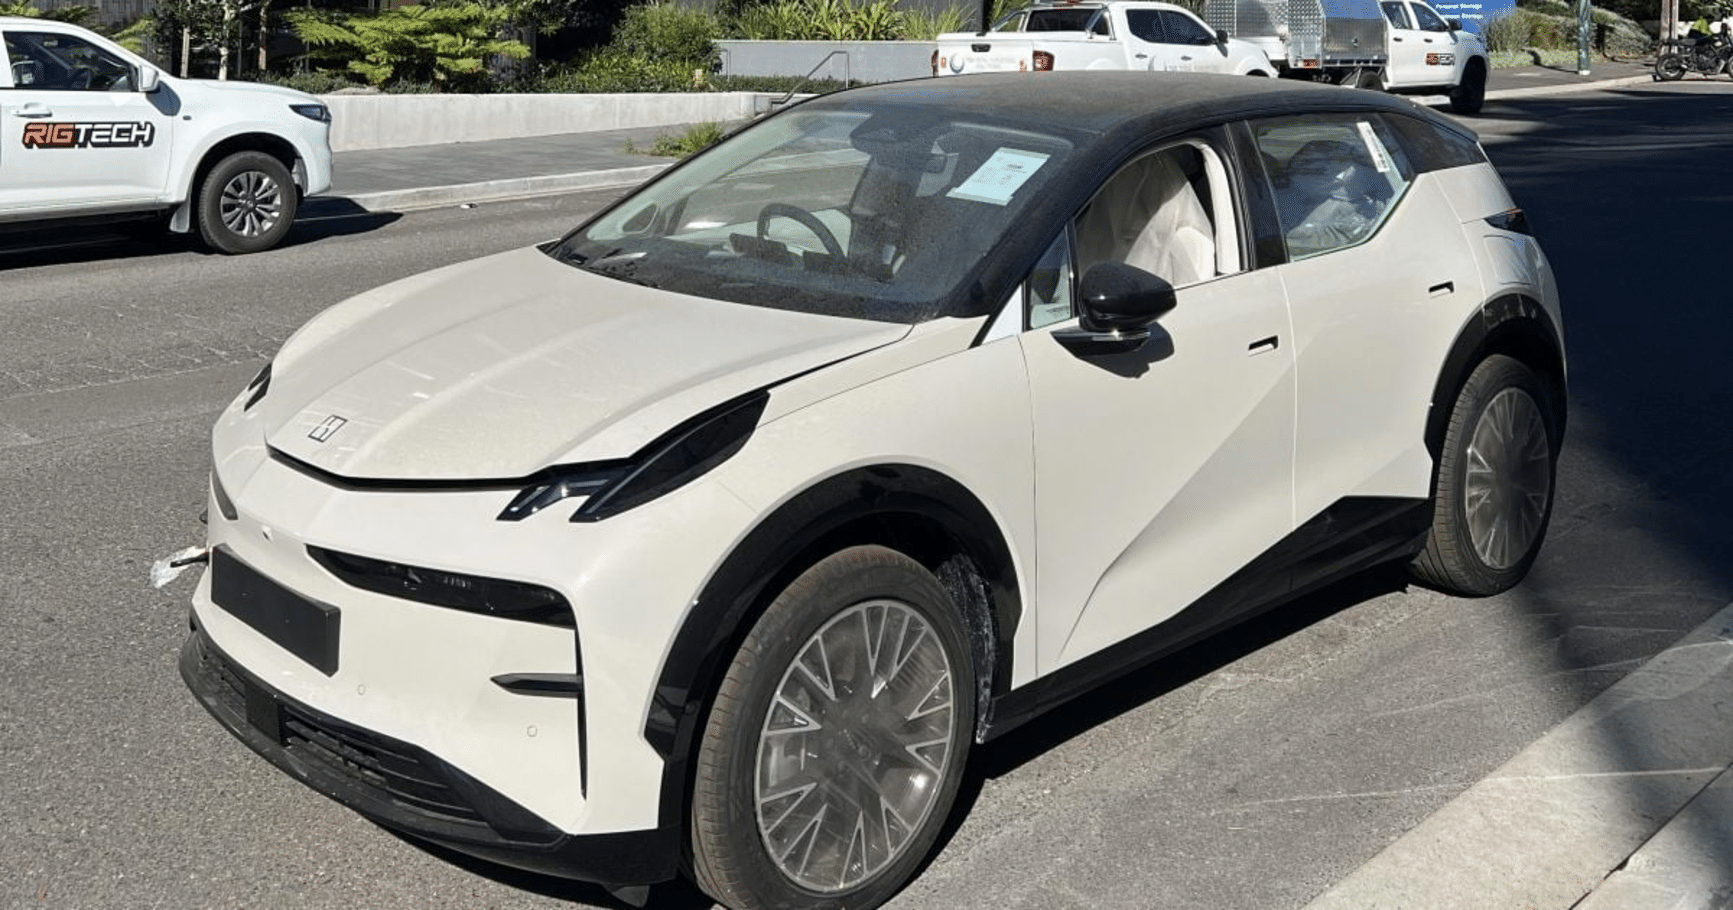 Zeekr X Electric Vehicle Set to Arrive in Australia: What to Expect